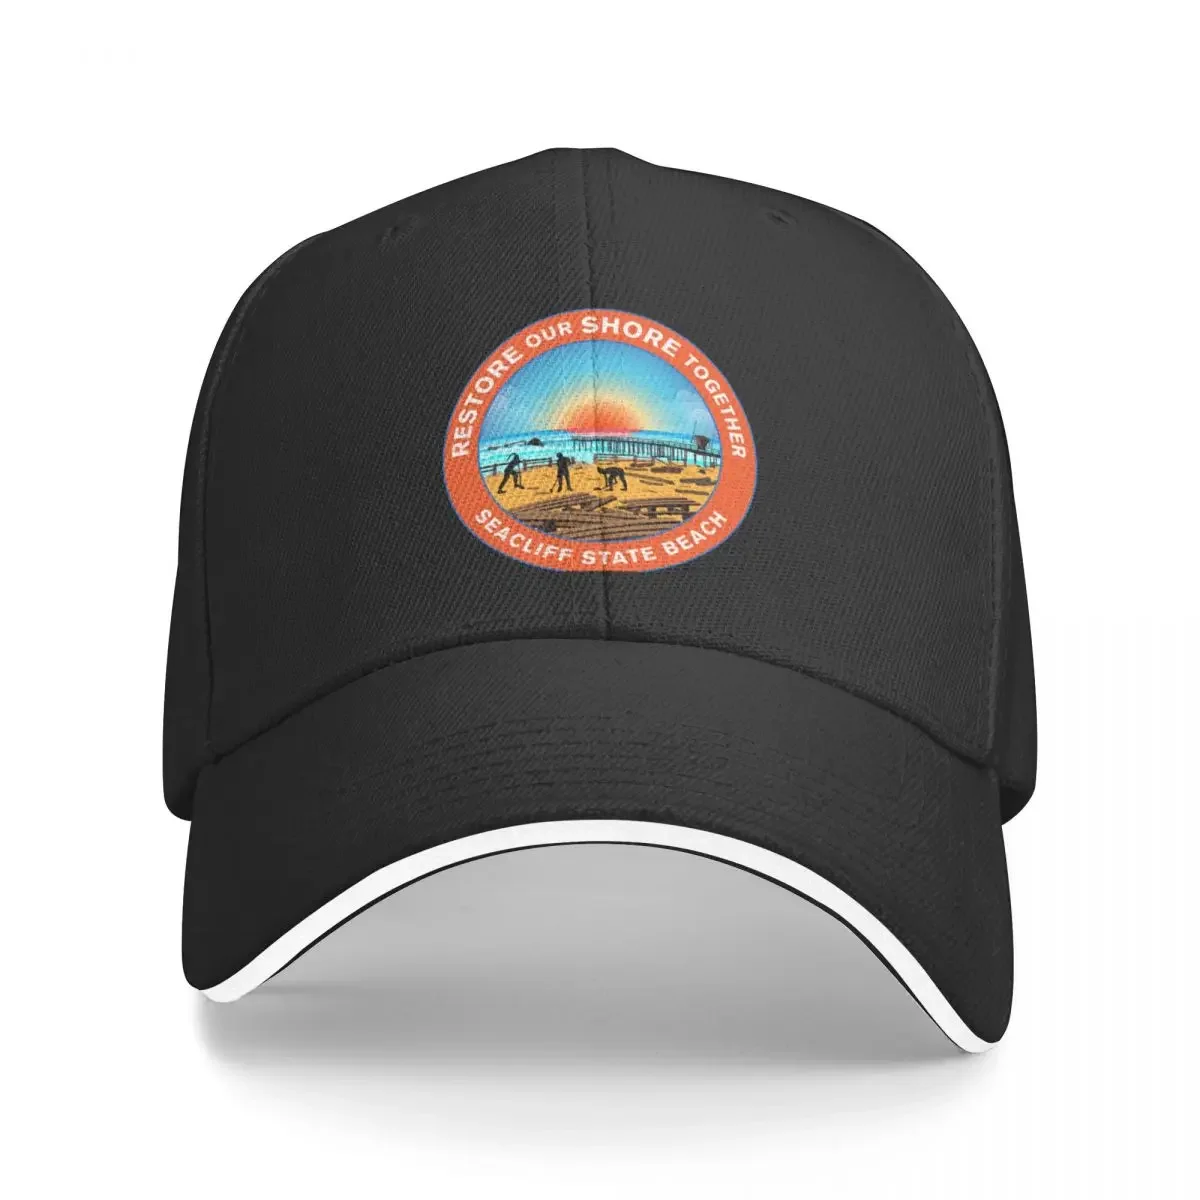 

New Restore Our Shore Together Seacliff State Beach California Black Baseball Cap Hats Big Size Hat Woman Hat Men's